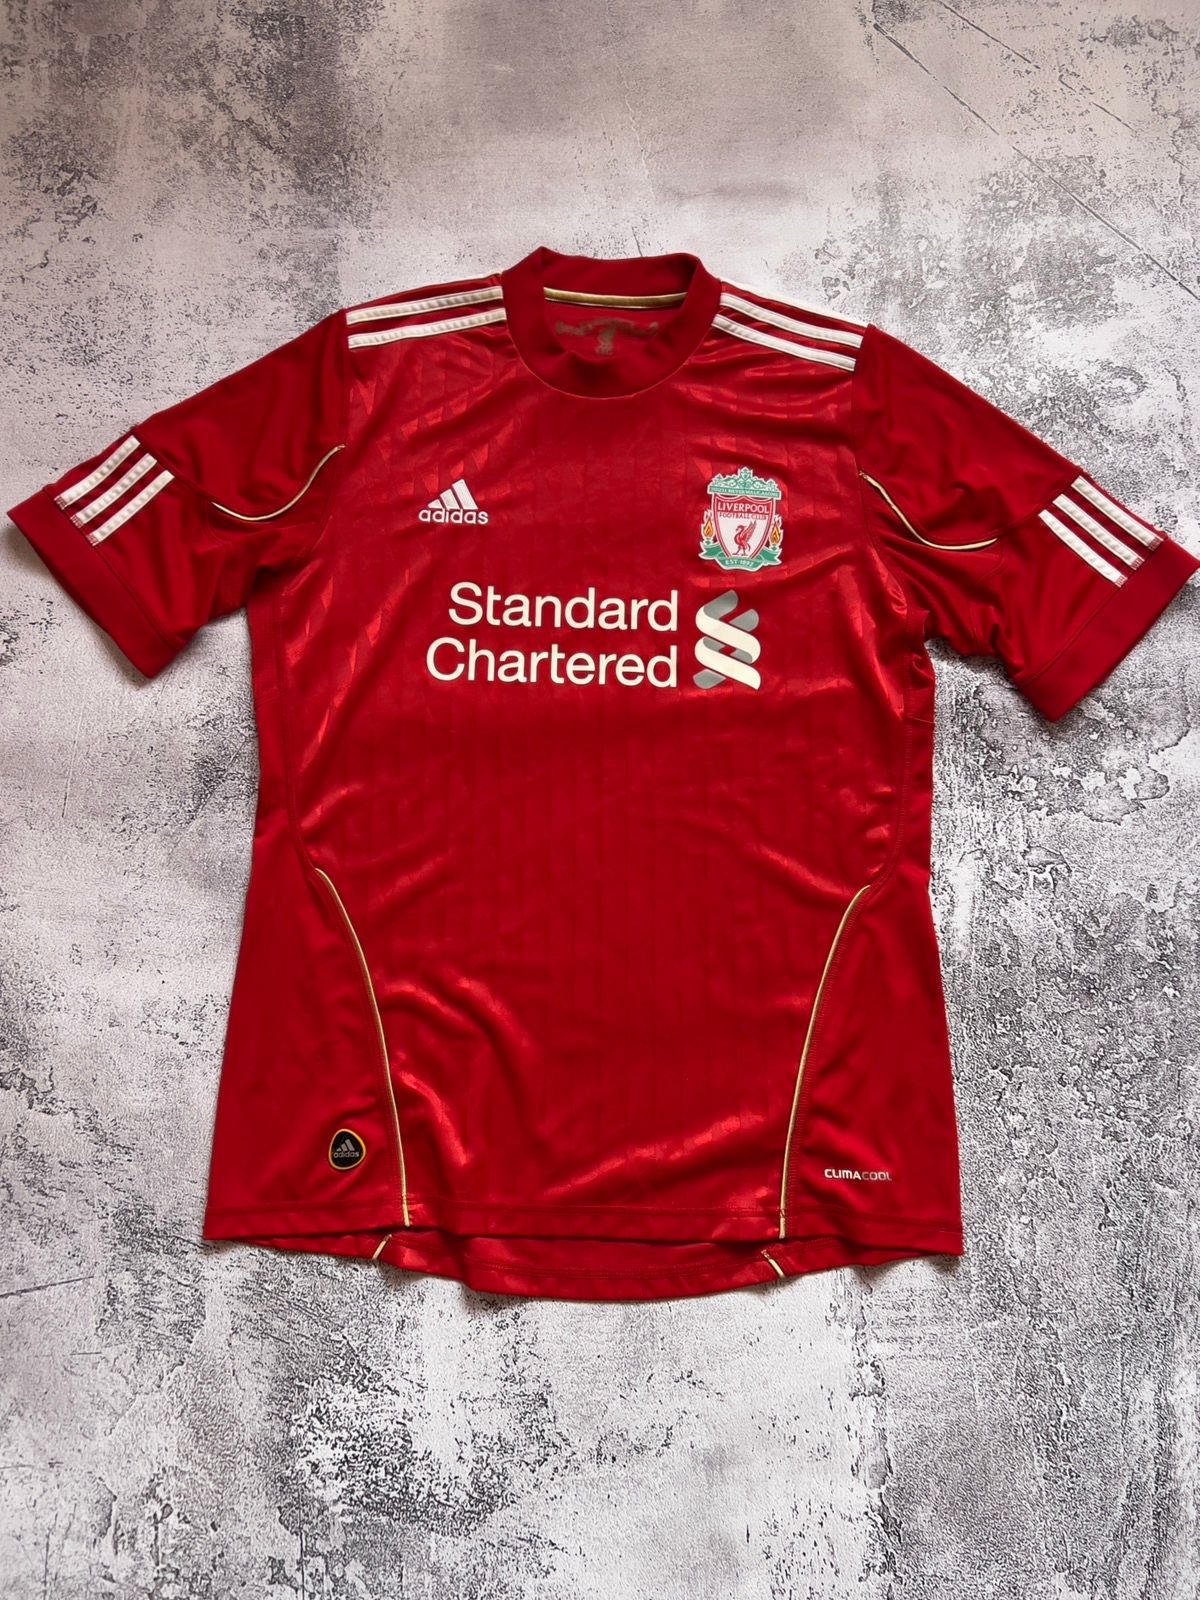 Pre-owned Adidas X Jersey 2010-12 Vintage Adidas Liverpool Home T-shirt Soccer Jersey In Red